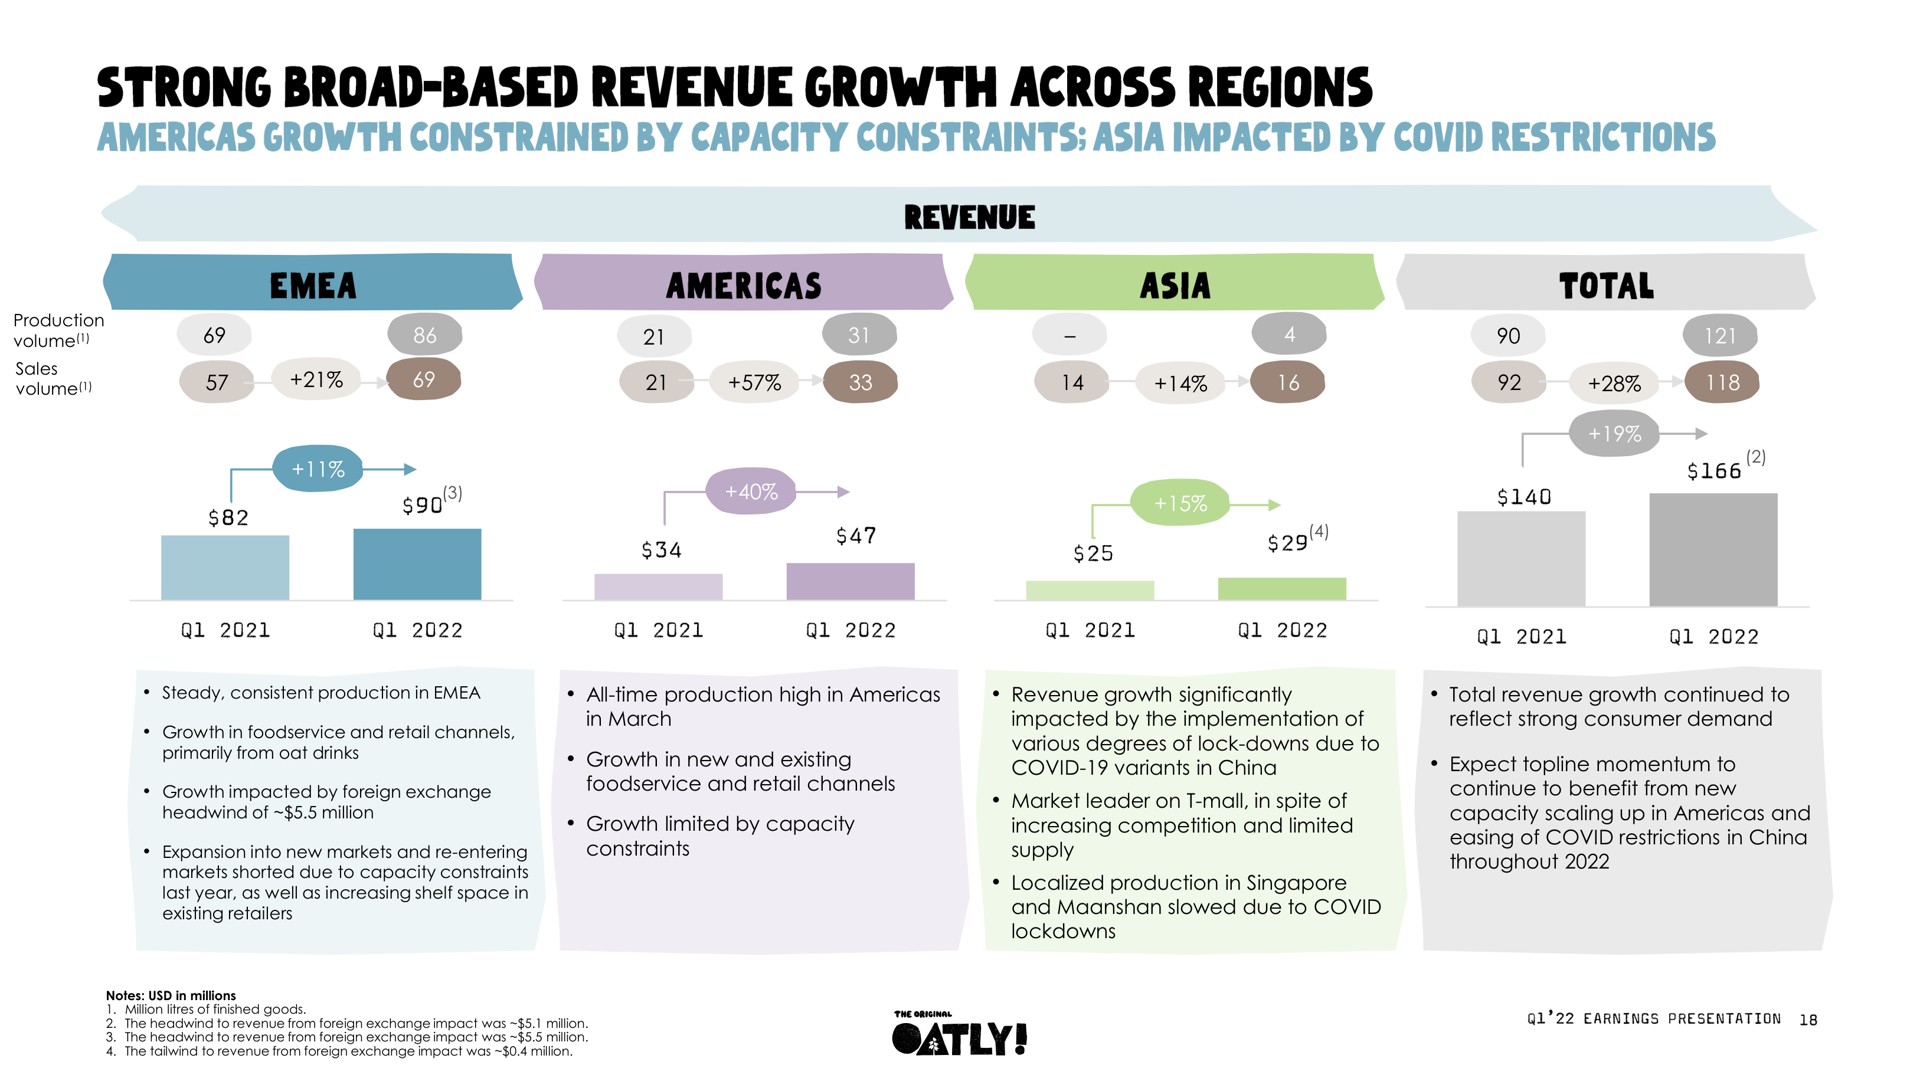 strong broad based revenue growth across regions growth constrained by capacity constraints impacted by covid restrictions | Oatly